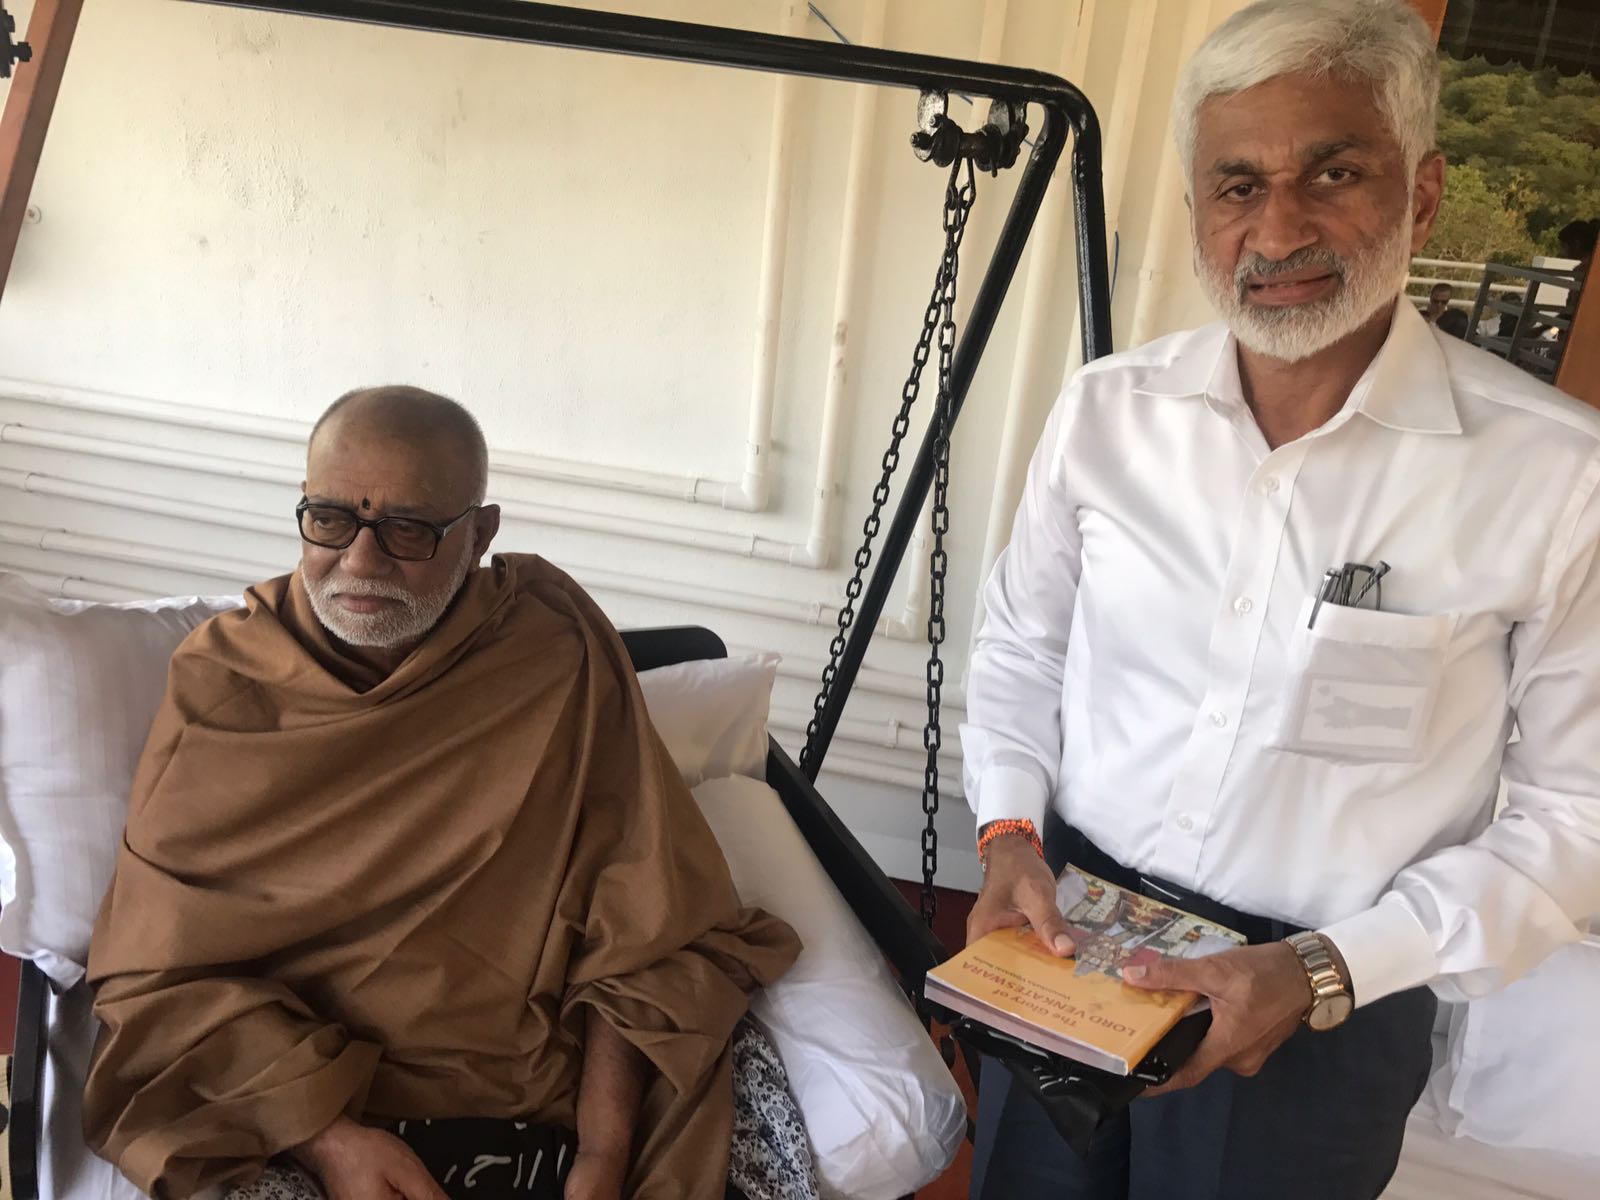 His Holiness Shri Murari BapuJi has blessed me by writing "Words of Blessing" for my book "The Glory of Lord Venkateswara".